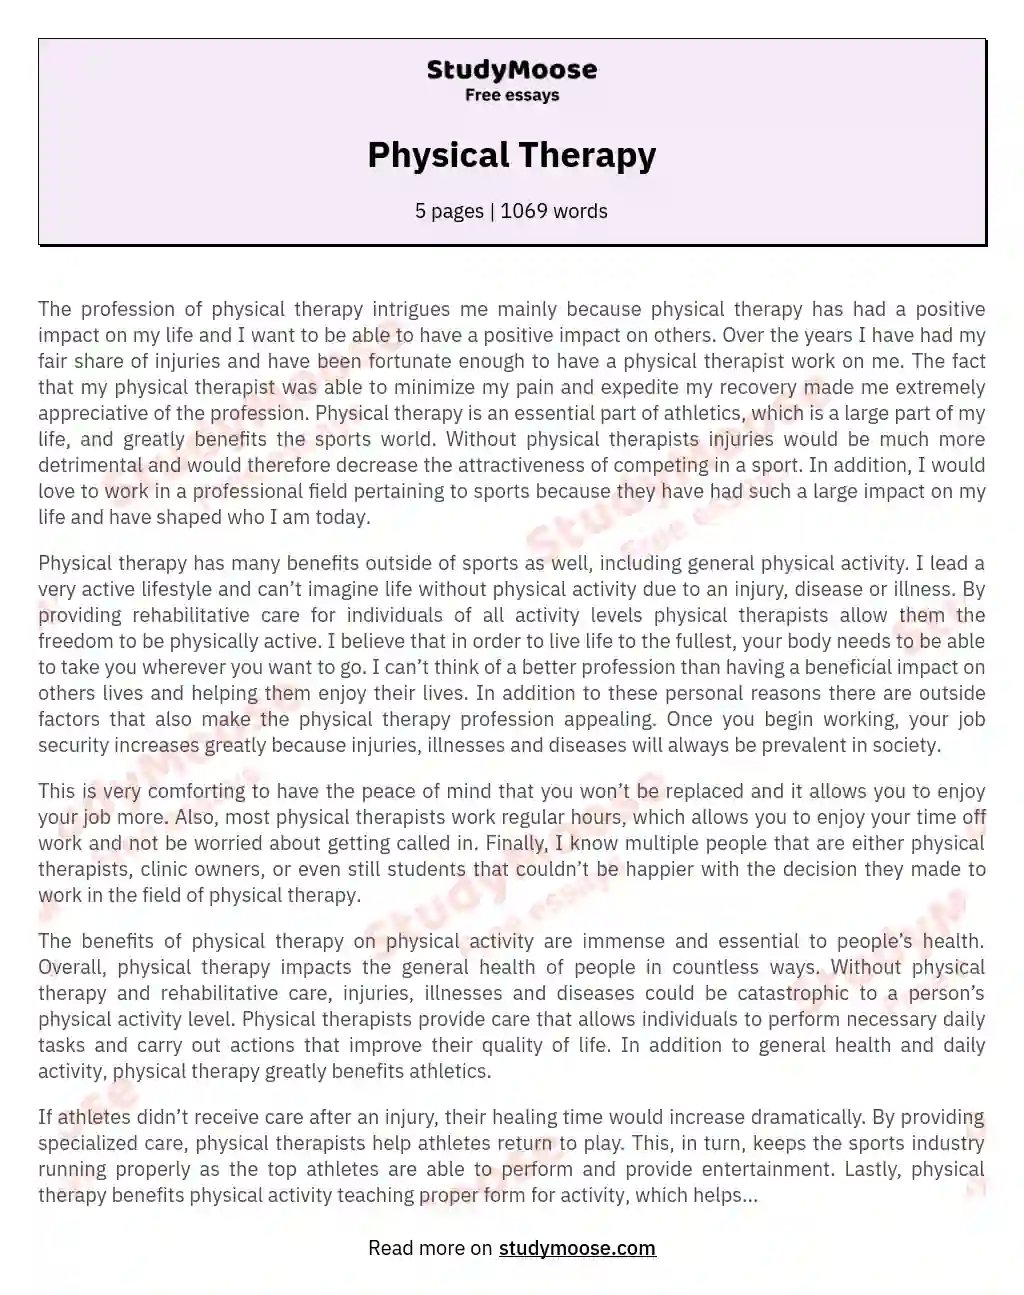 Physical Therapy essay